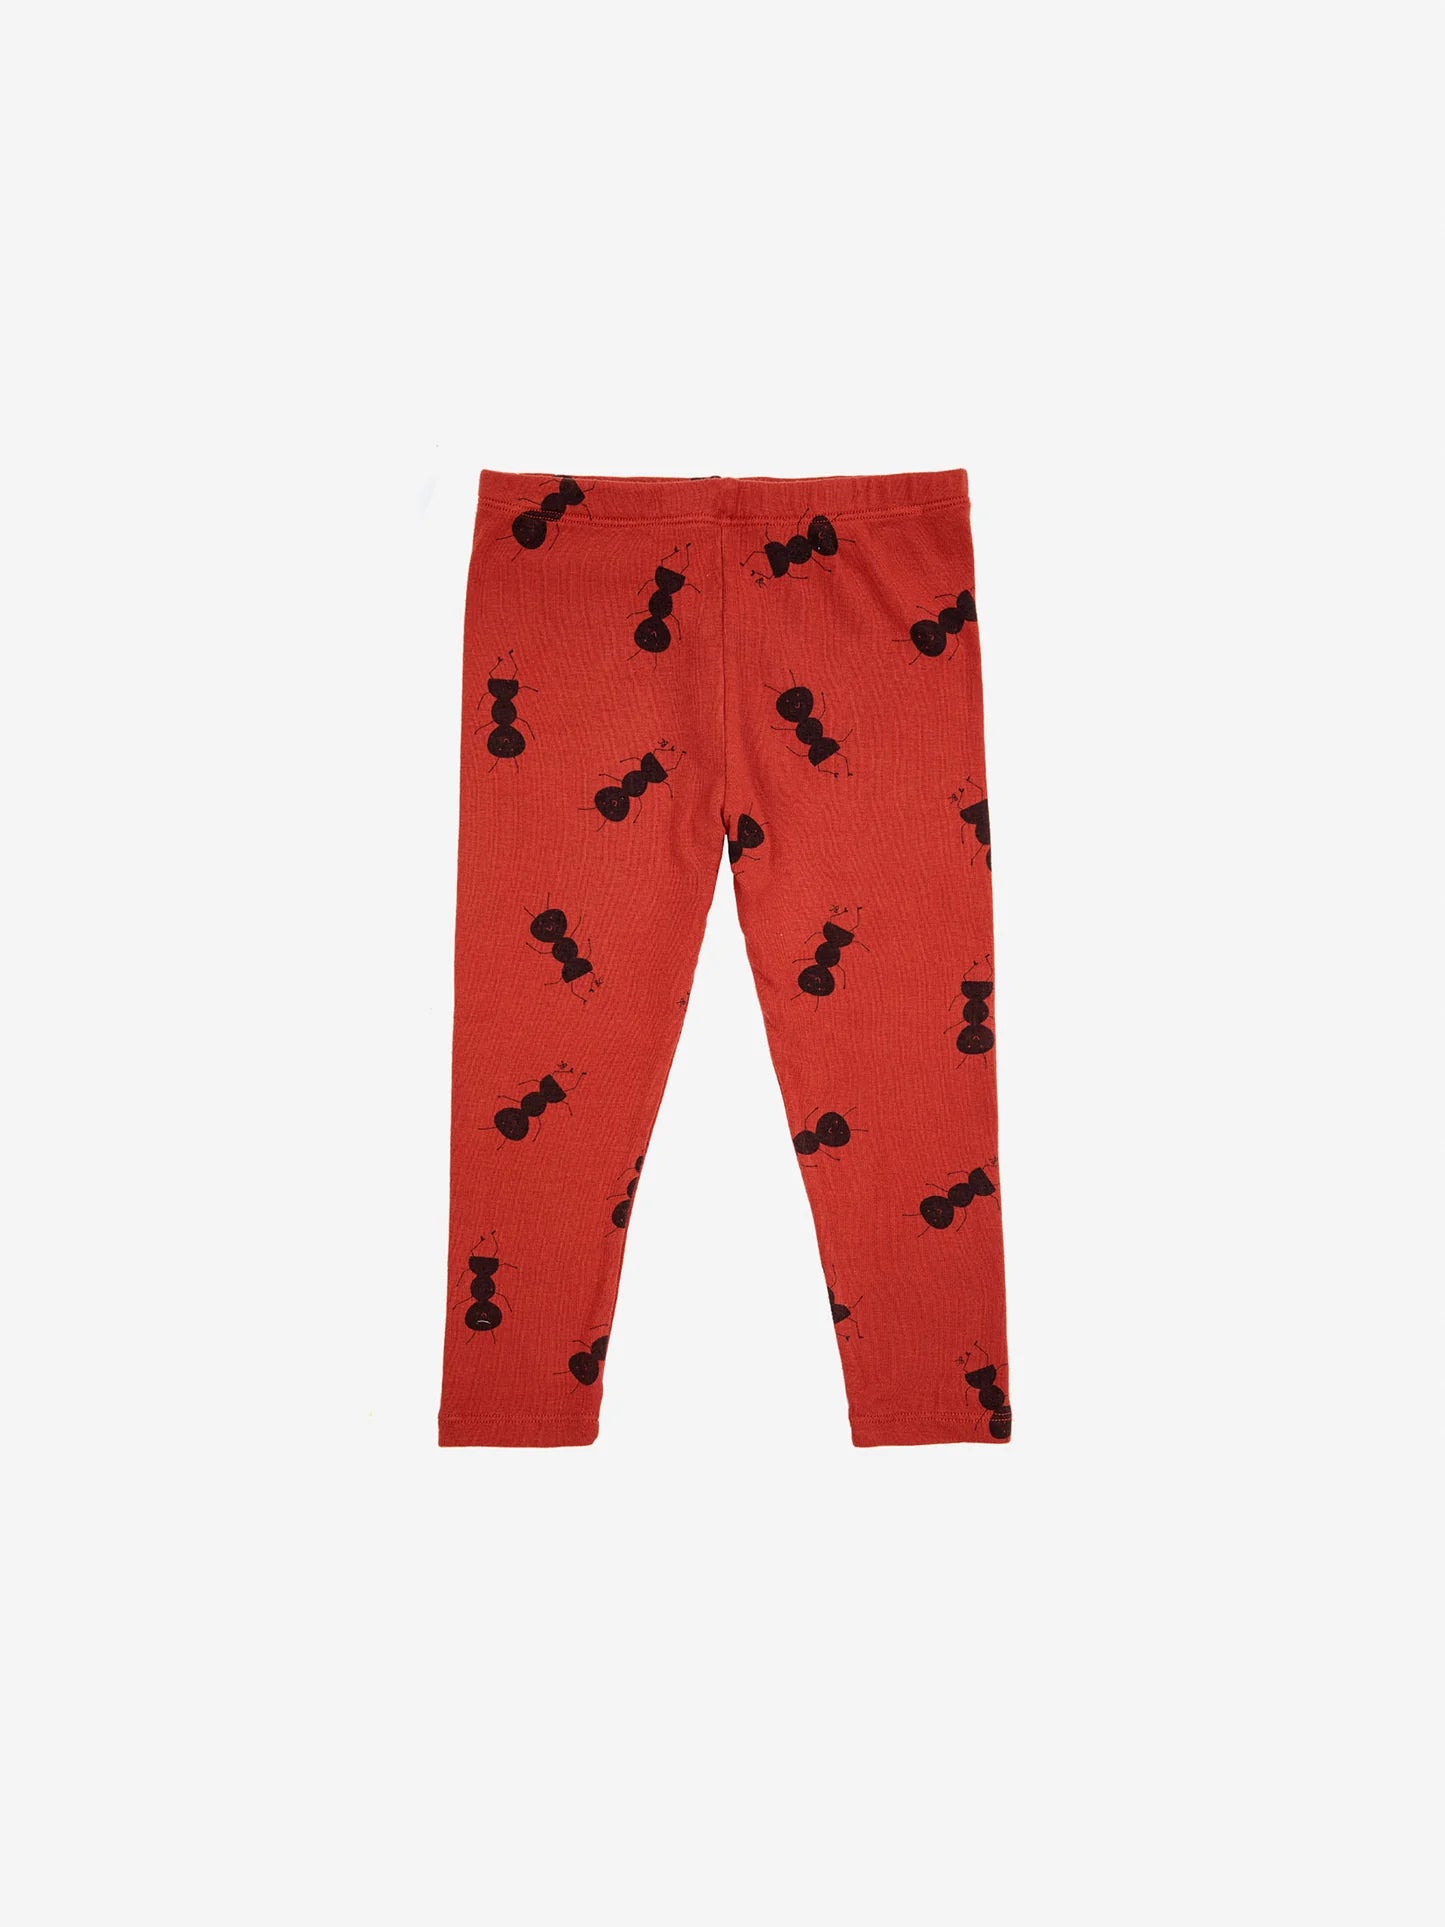 Baby Ant All Over Leggings by Bobo Choses.